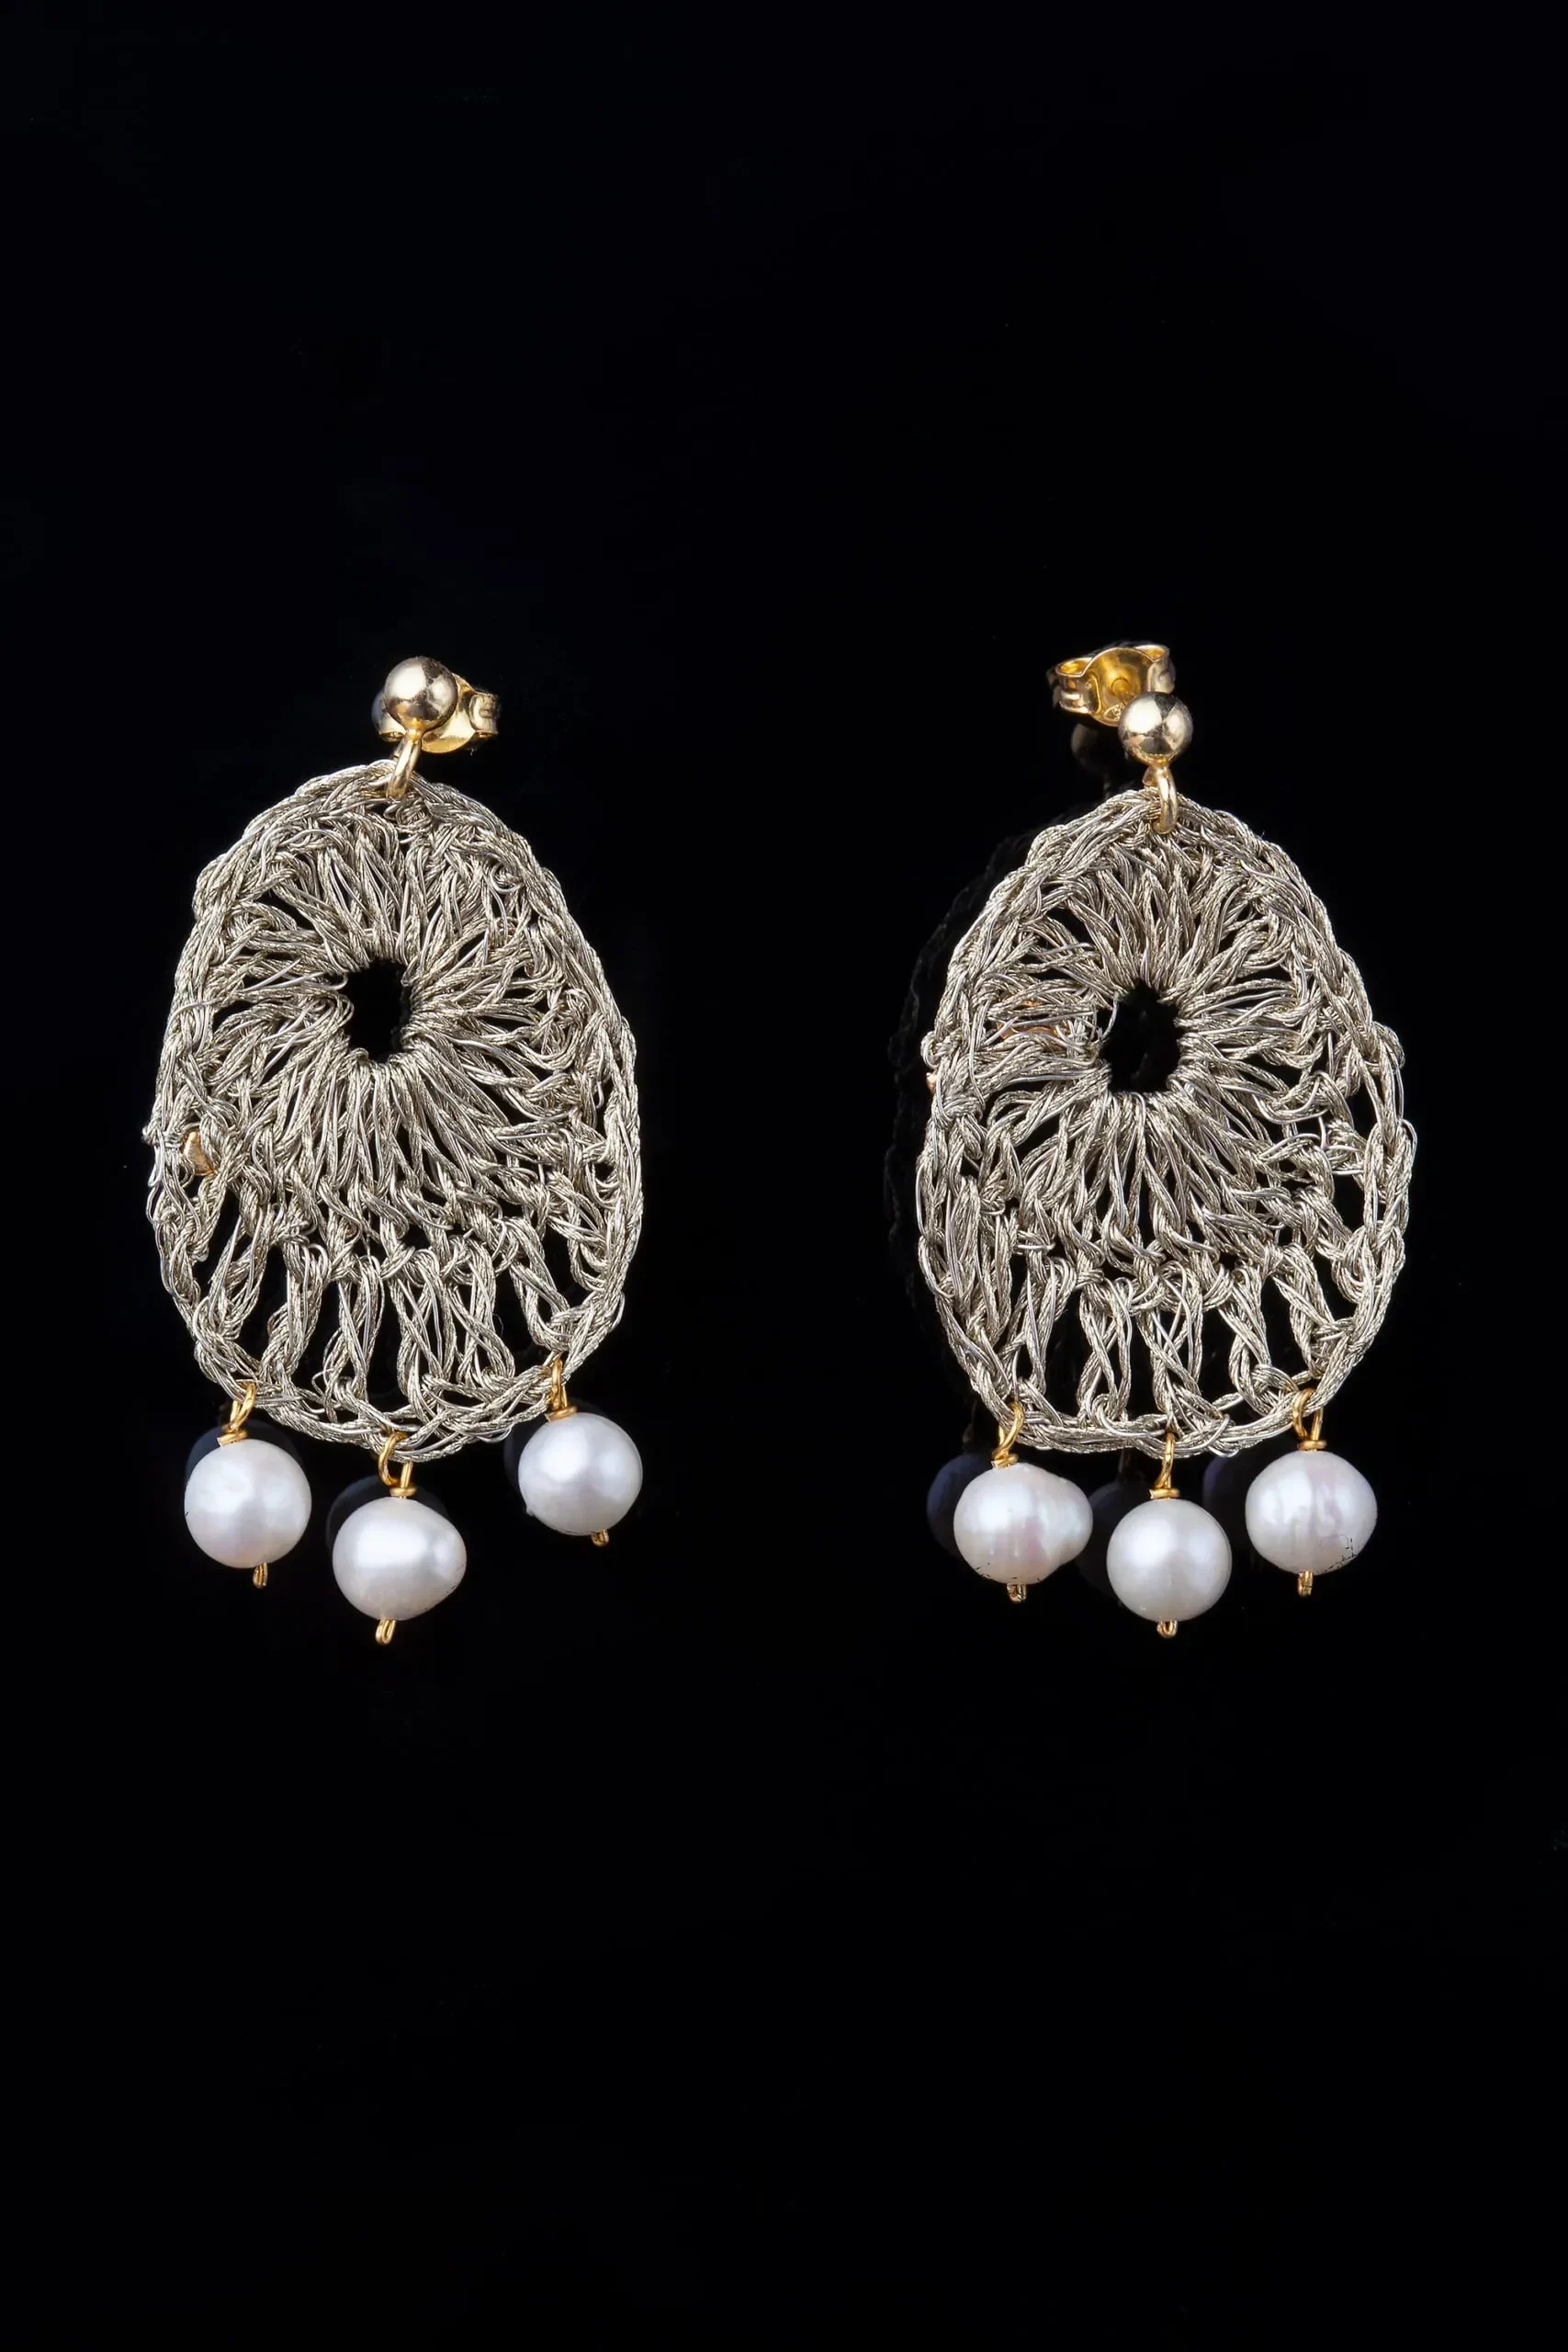 Handmade Jewellery | Crochet knit silver earrings with golden threads and pearls gallery 2